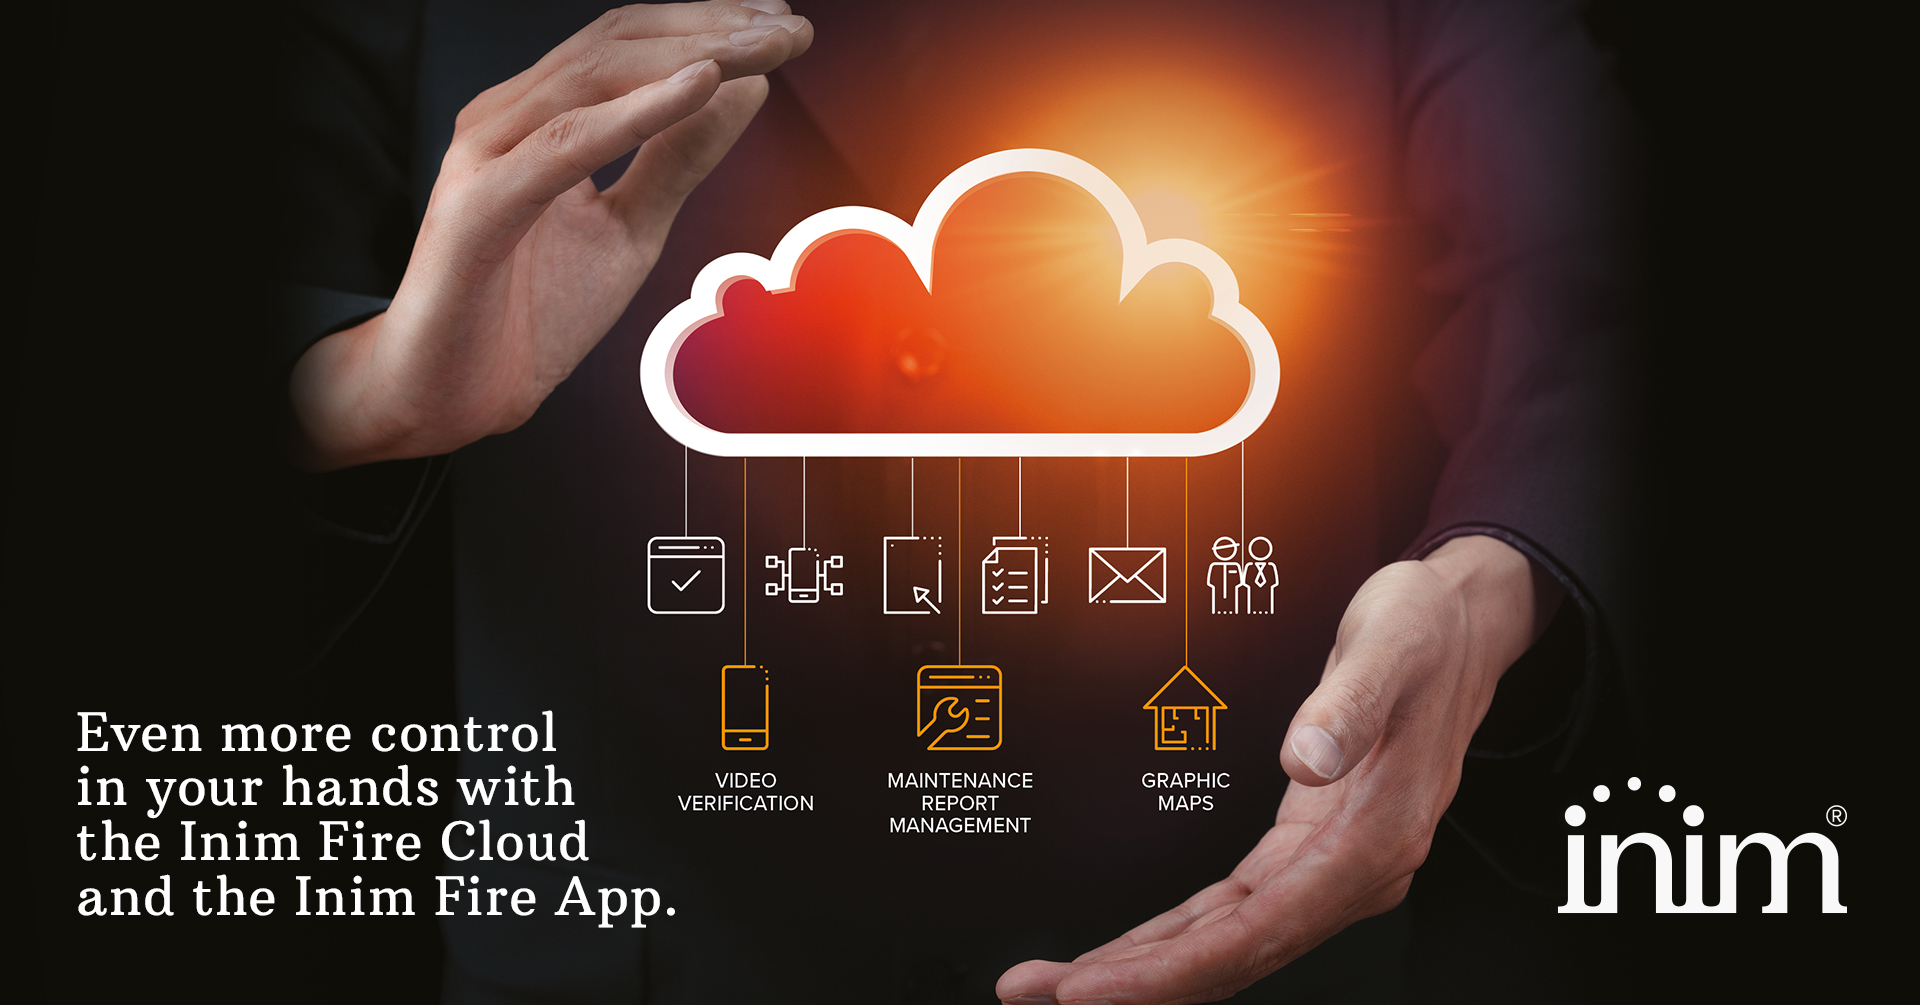 Even more control in your hands with the Inim Cloud Fire and the Inim Fire App!